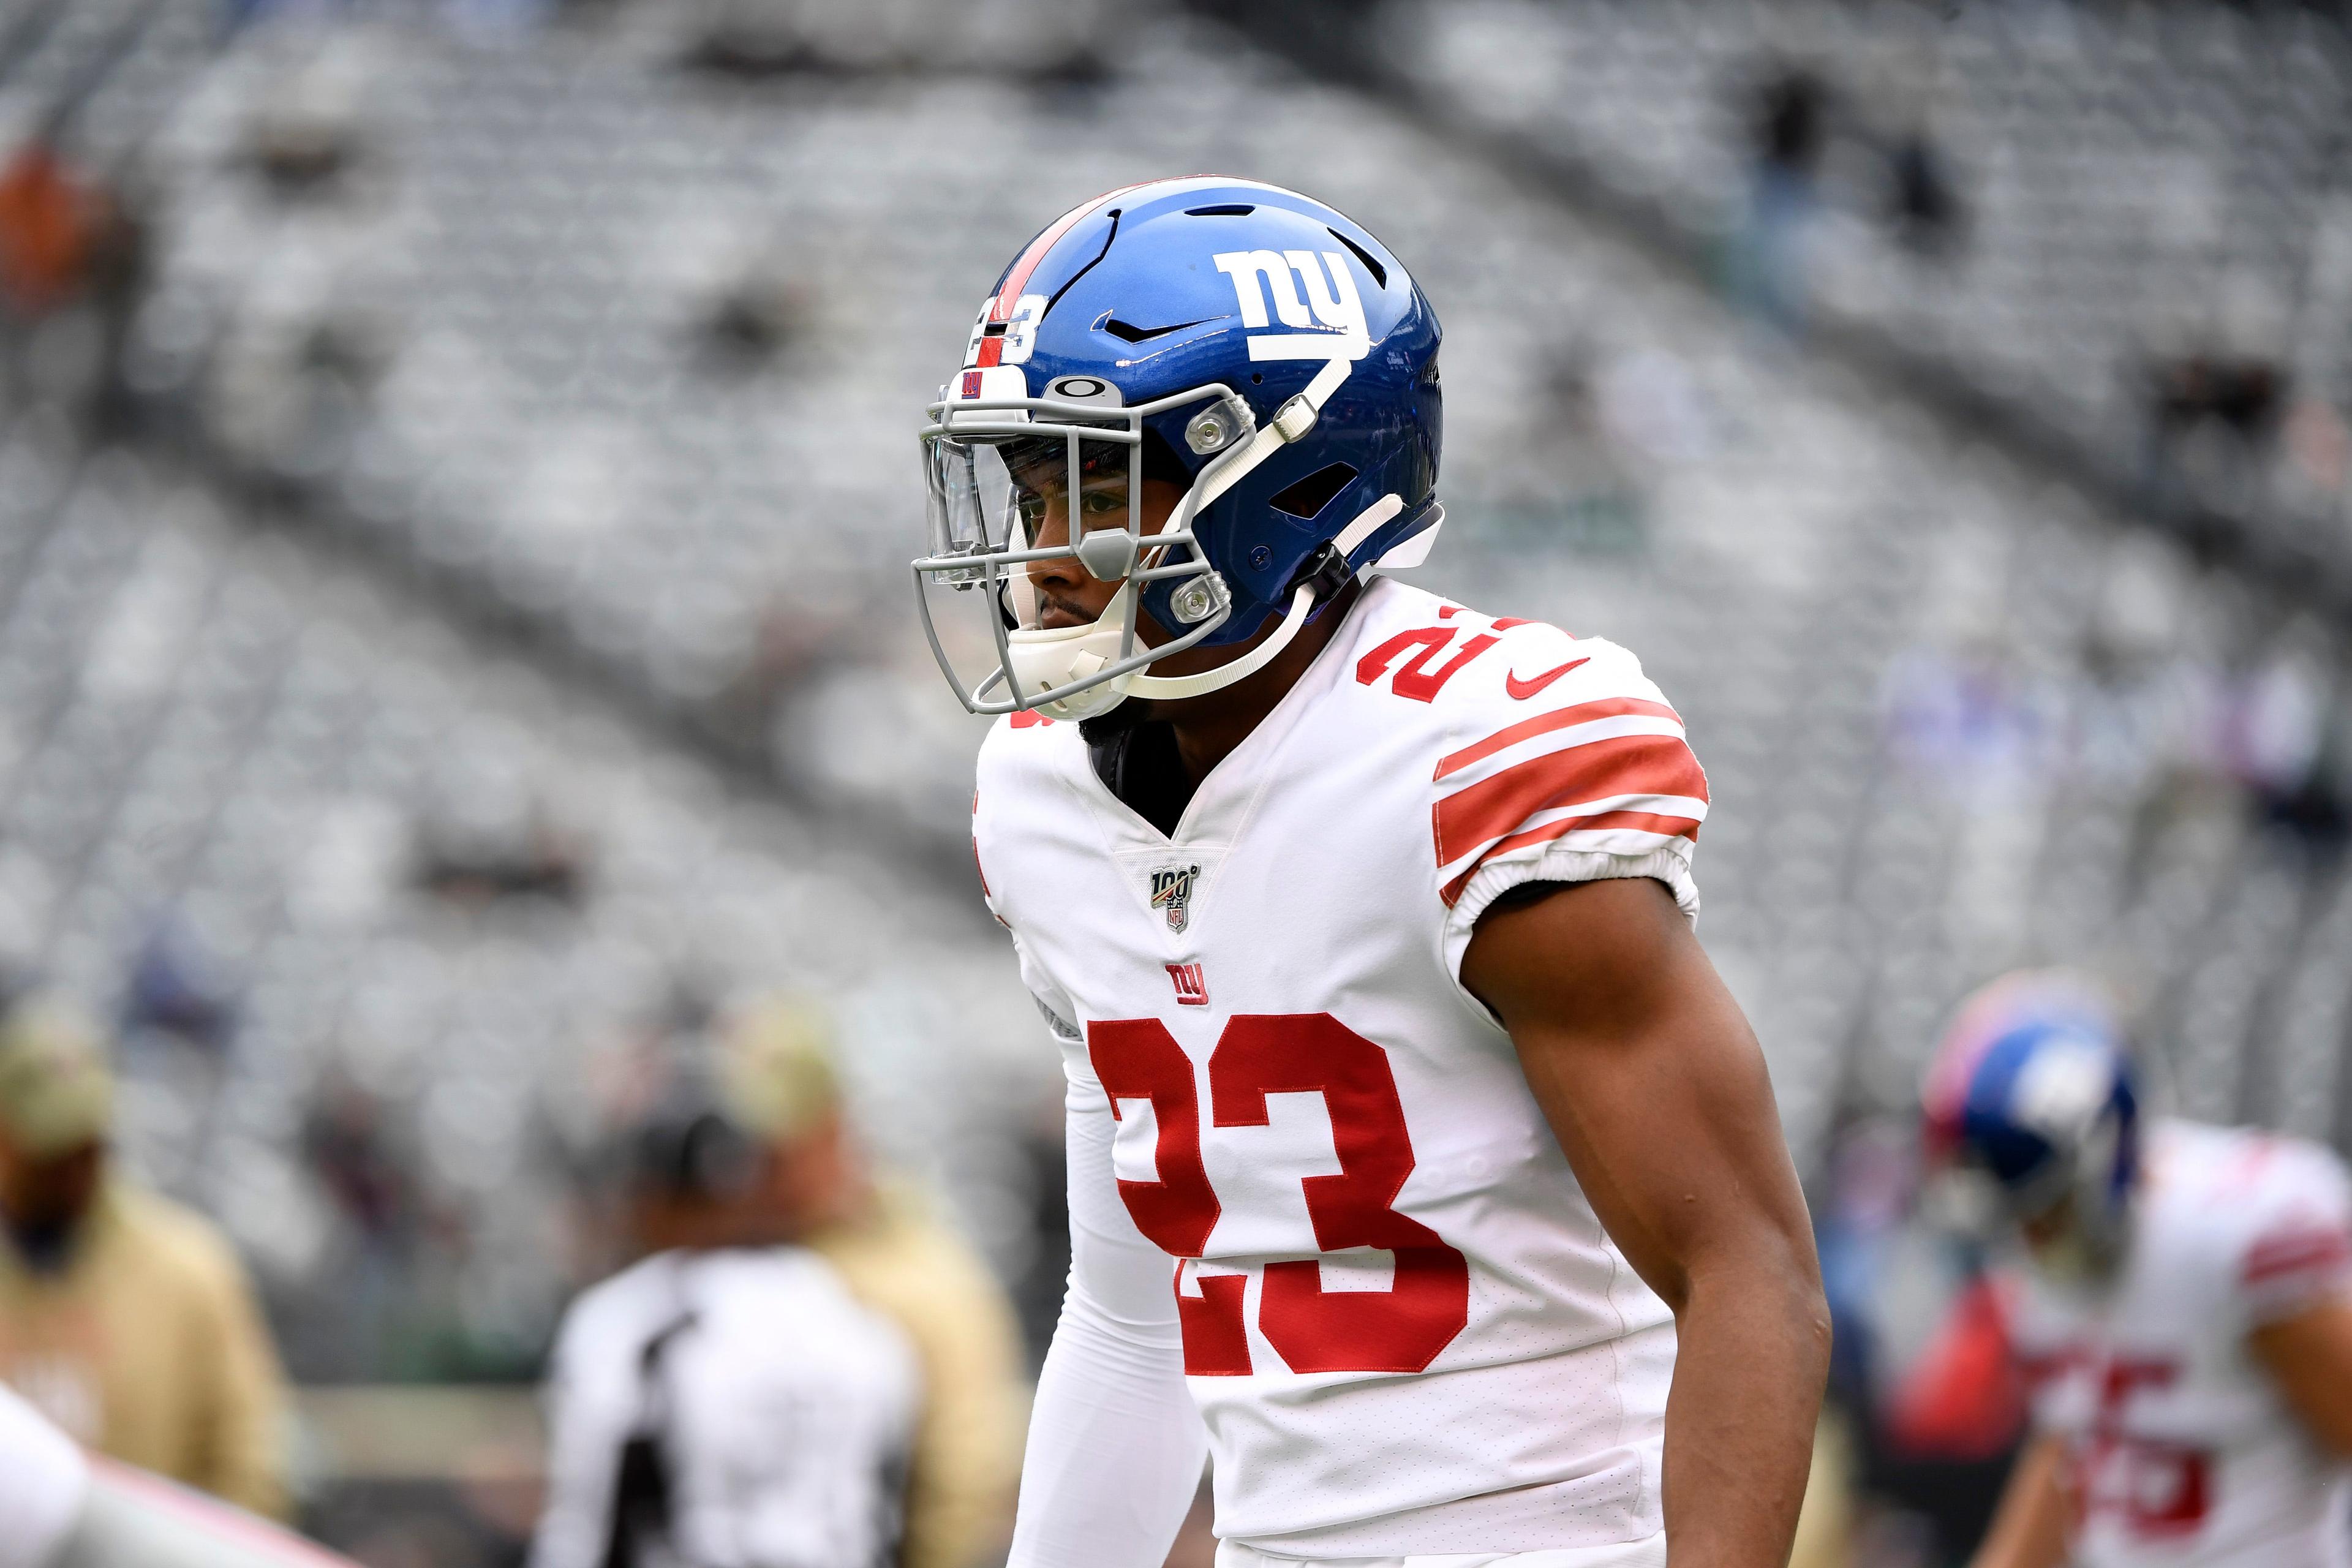 New York Giants cornerback Sam Beal (23) warms up before his Giants debut against the New York Jets on Sunday, Nov. 10, 2019, in East Rutherford. Nyg Vs Nyj Week 10 / © Danielle Parhizkaran/NorthJersey.com, North Jersey Record via Imagn Content Services, LLC